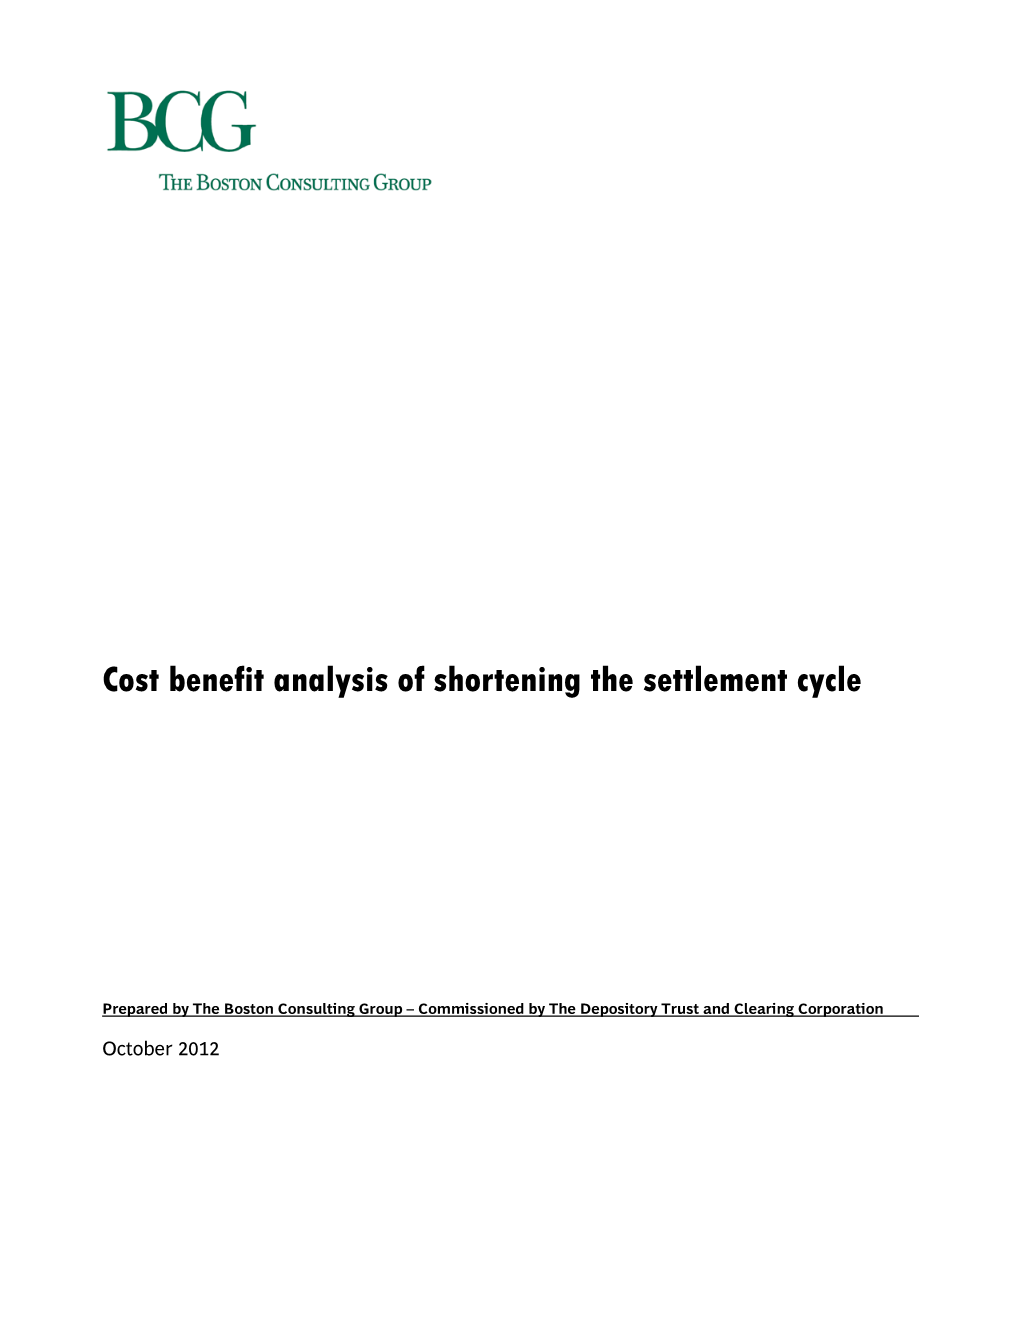 Cost Benefit Analysis of Shortening the Settlement Cycle